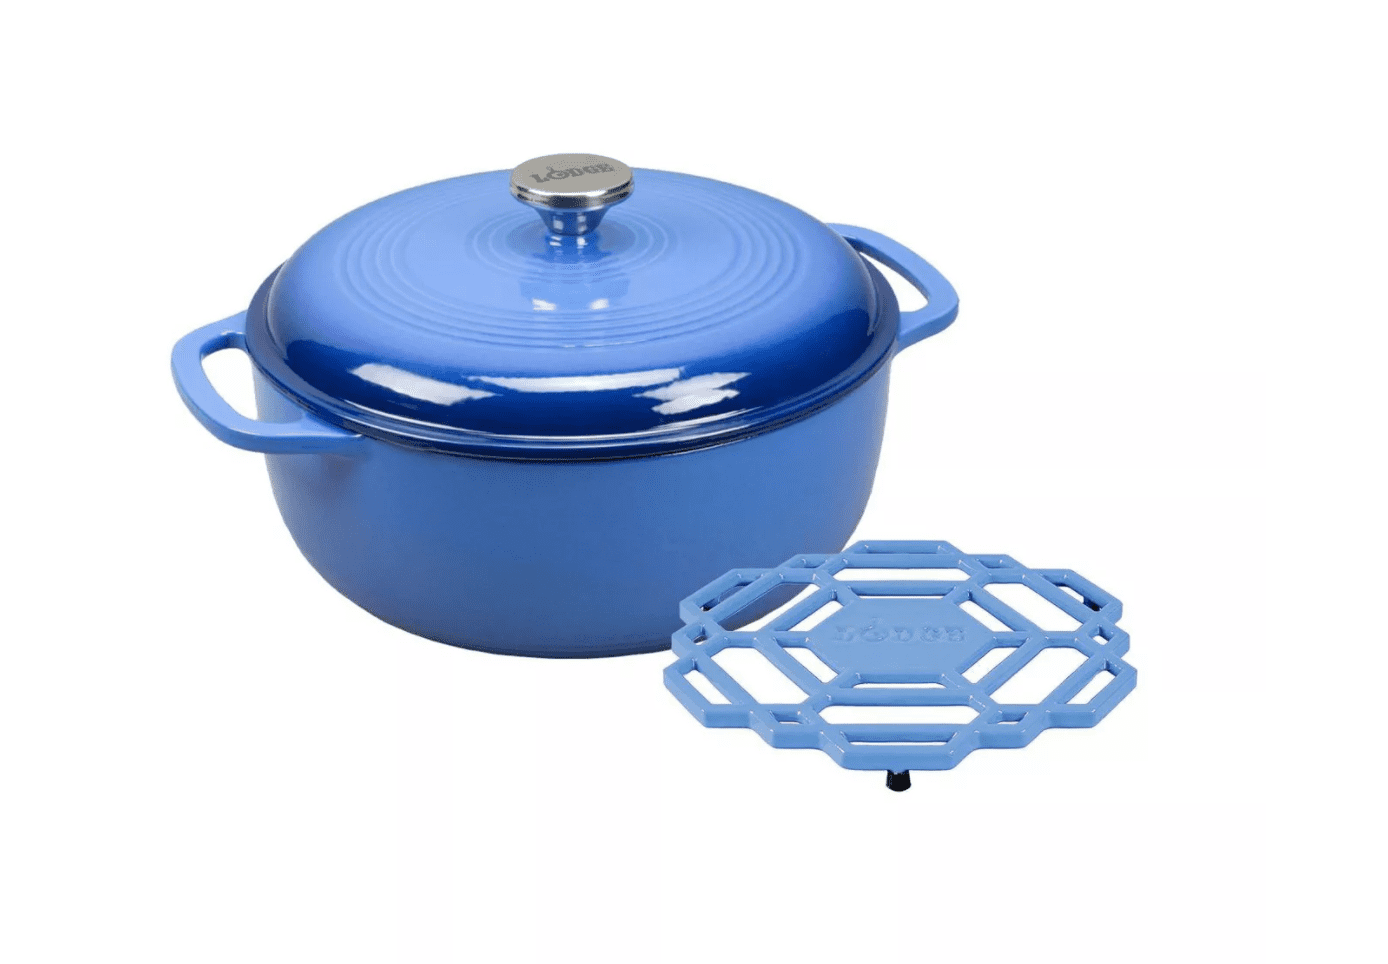 Lodge Dutch oven: This top-rated cookware is less than $70 right now